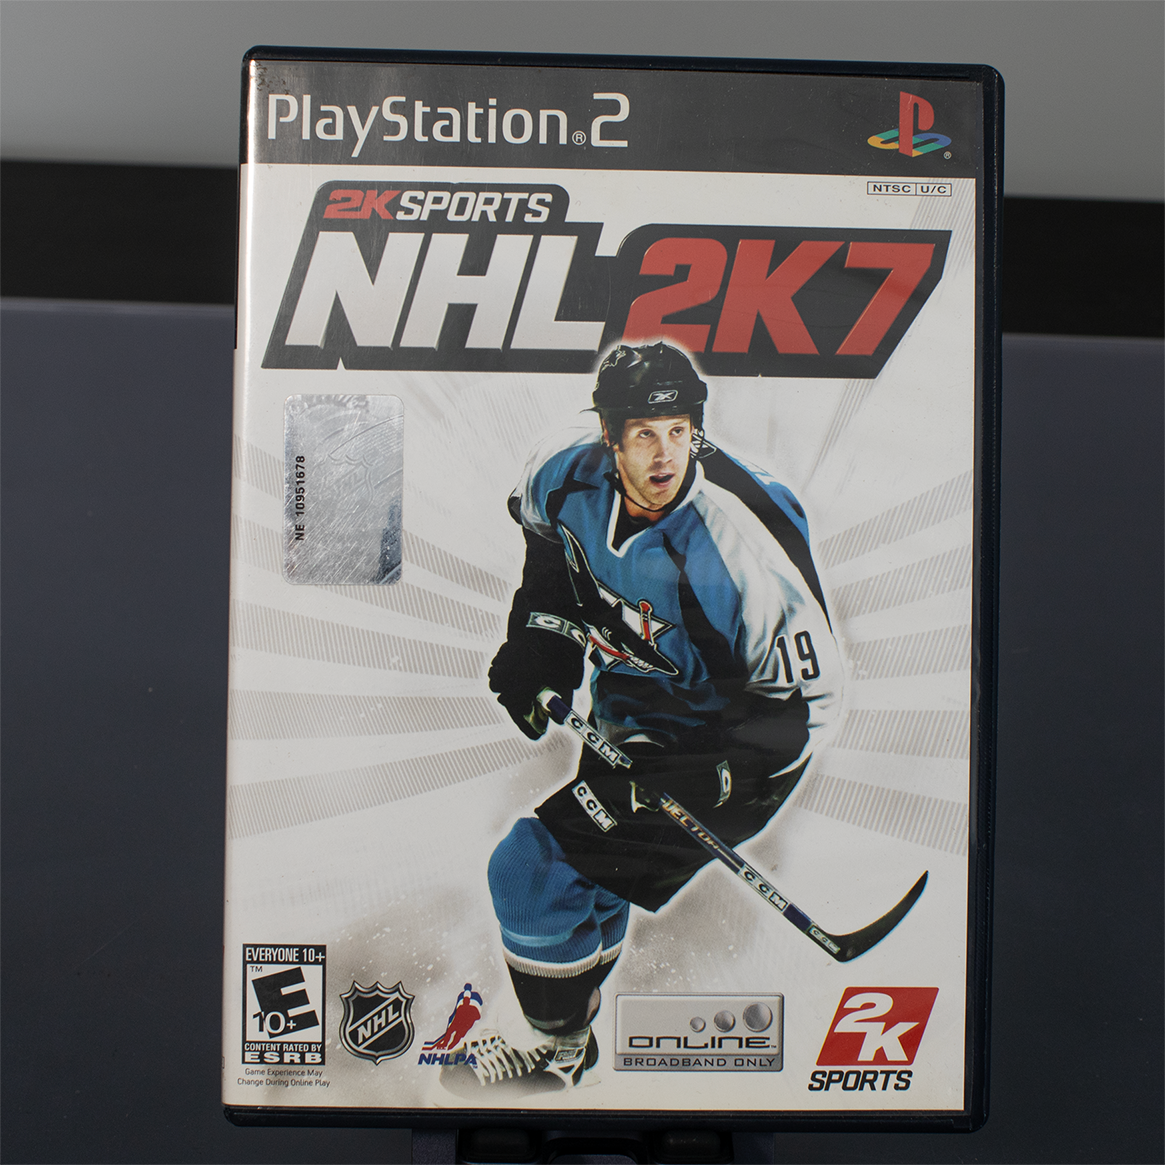 NHL2K7 - PS2 Game